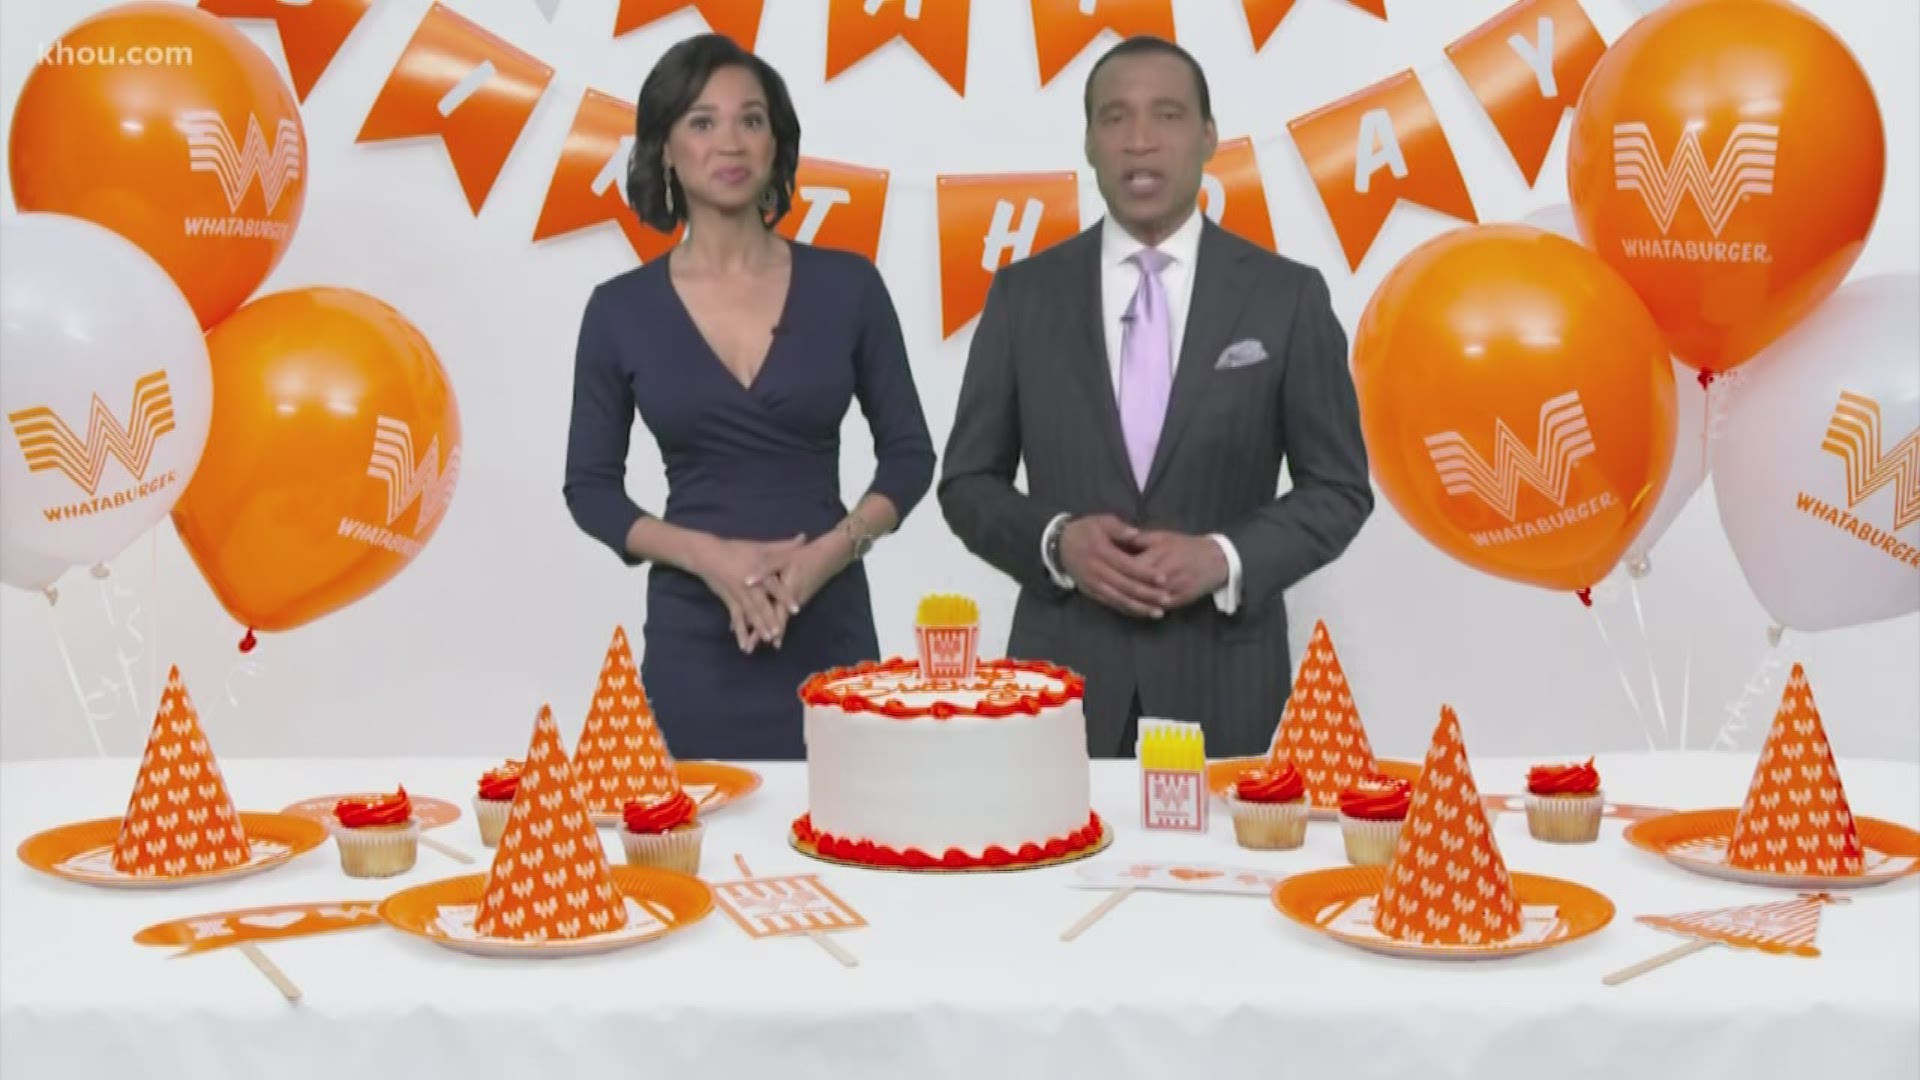 Texans can now celebrate their birthday in the best way possible. Whataburger is selling a “birthday bundle” full of items to help you throw a Whataburger-themed party.